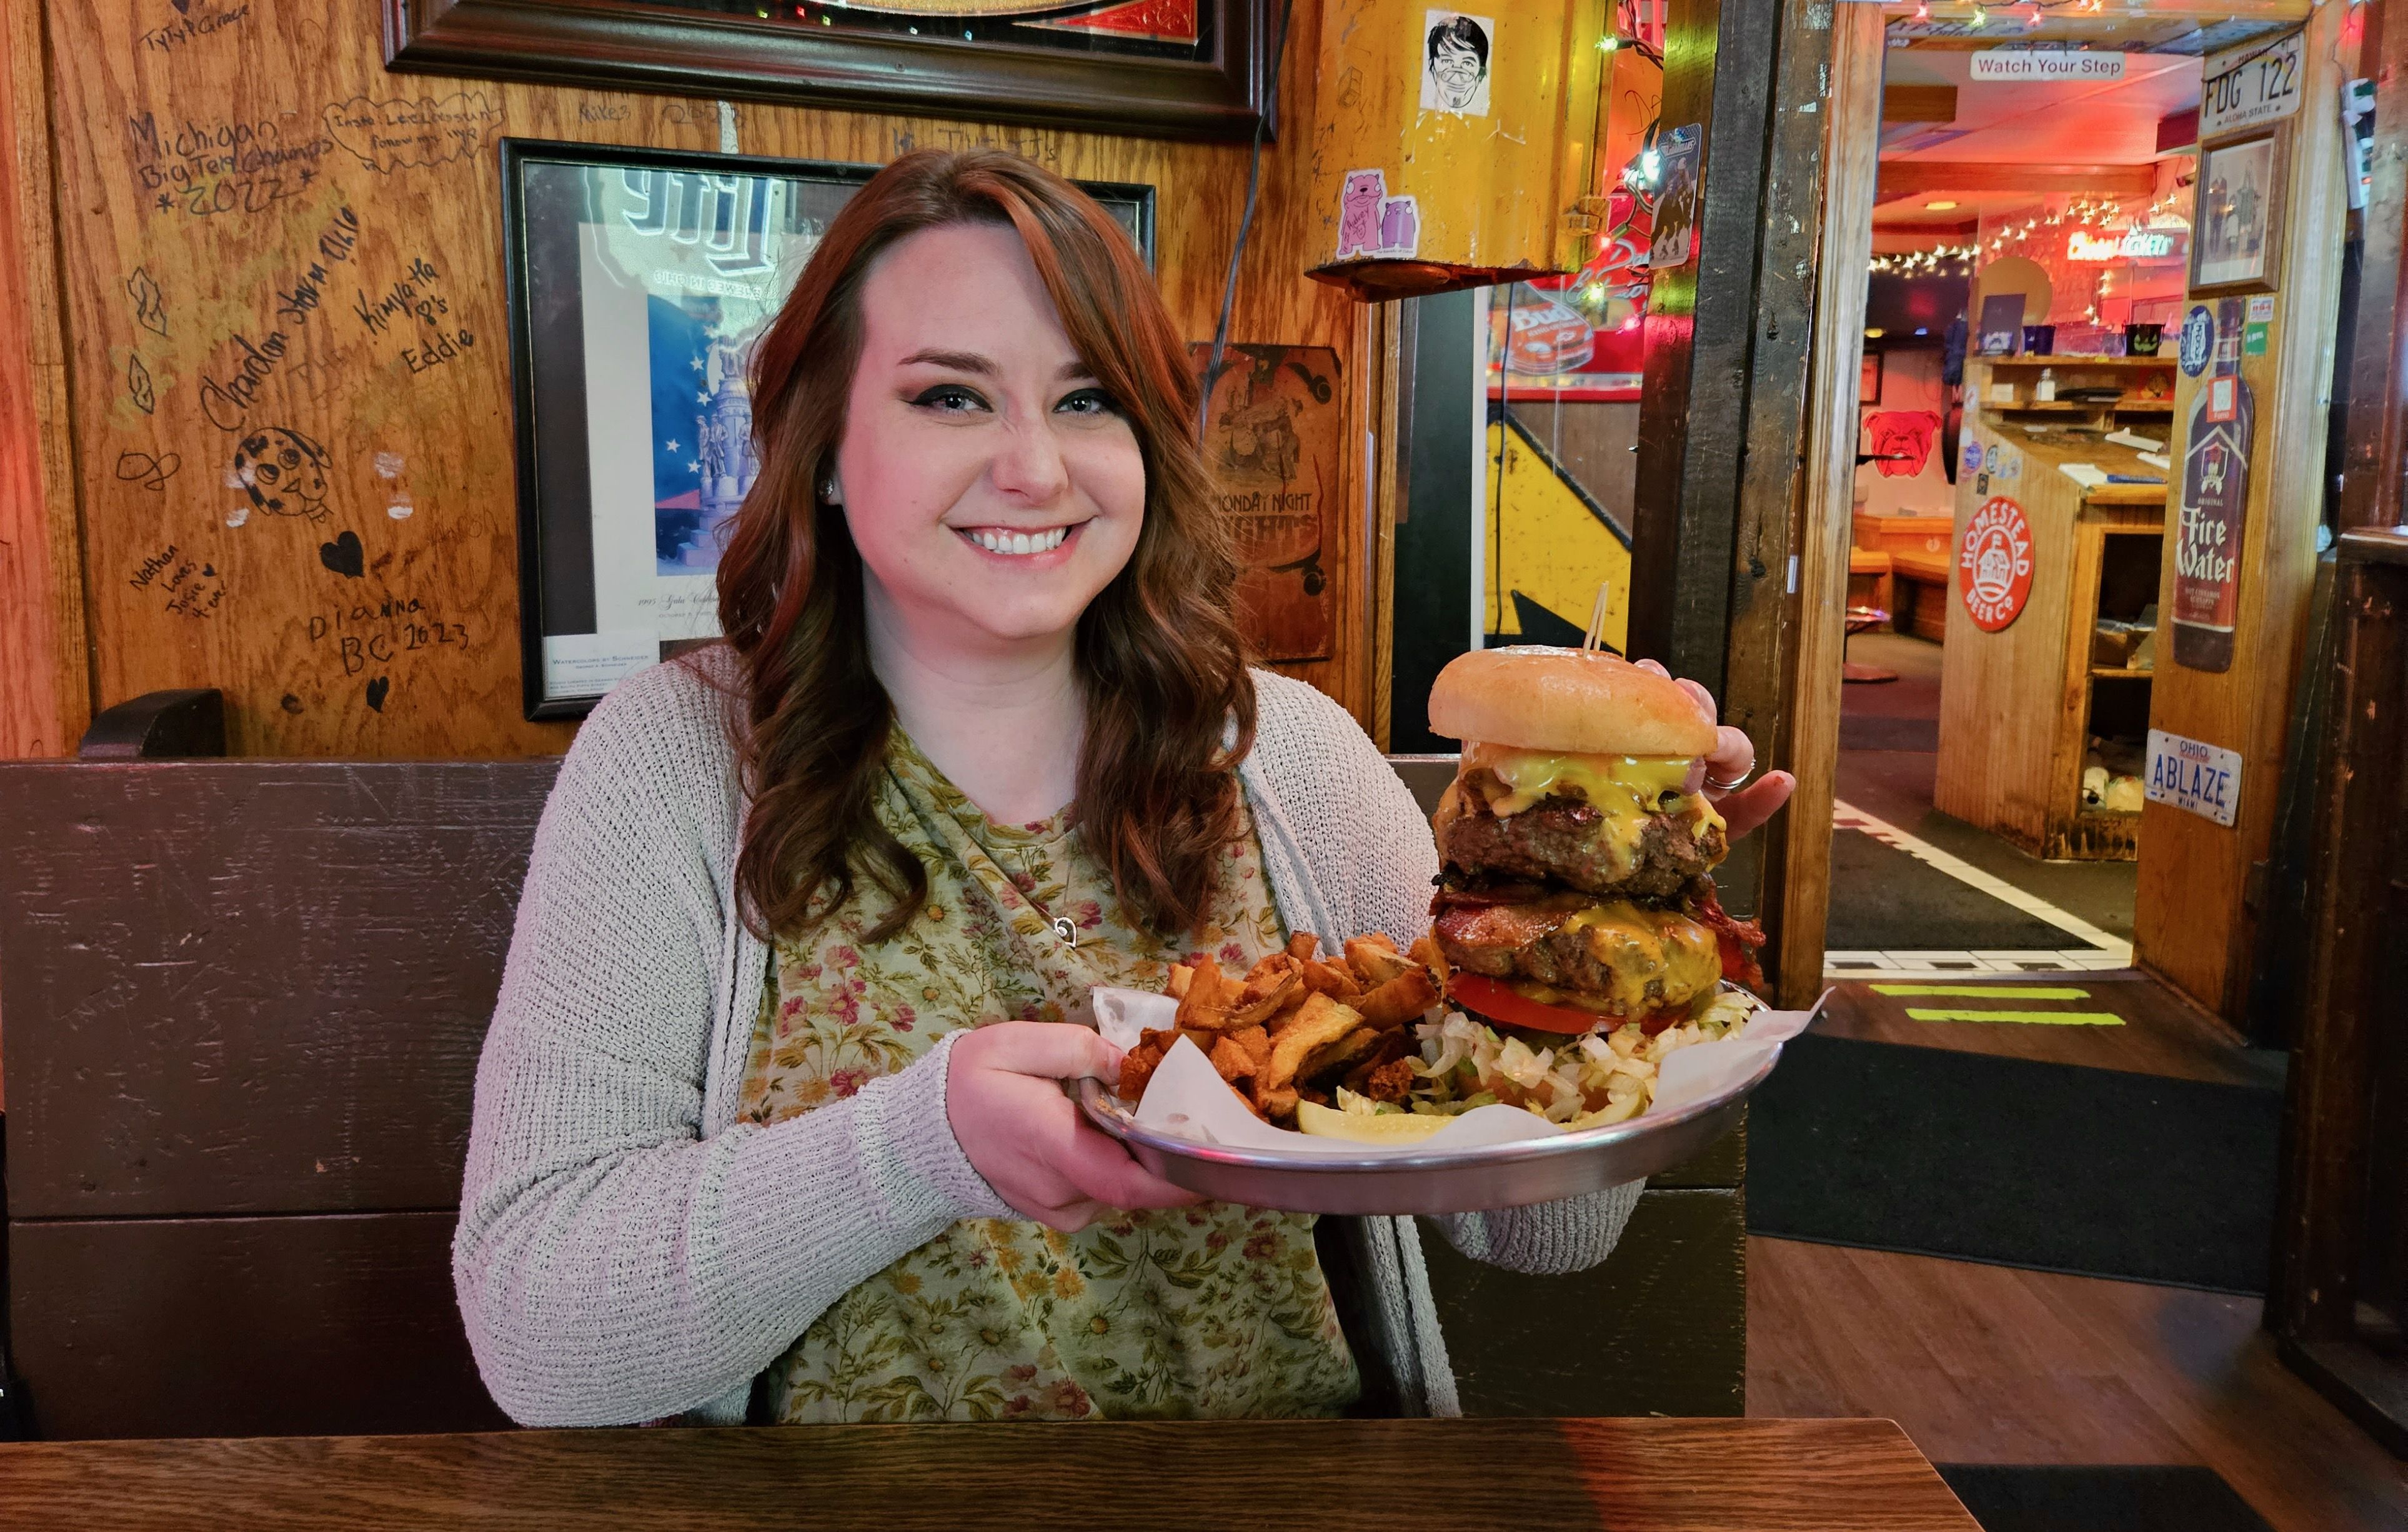 Alissa holds a plate with a Thurmanator burger and fries.